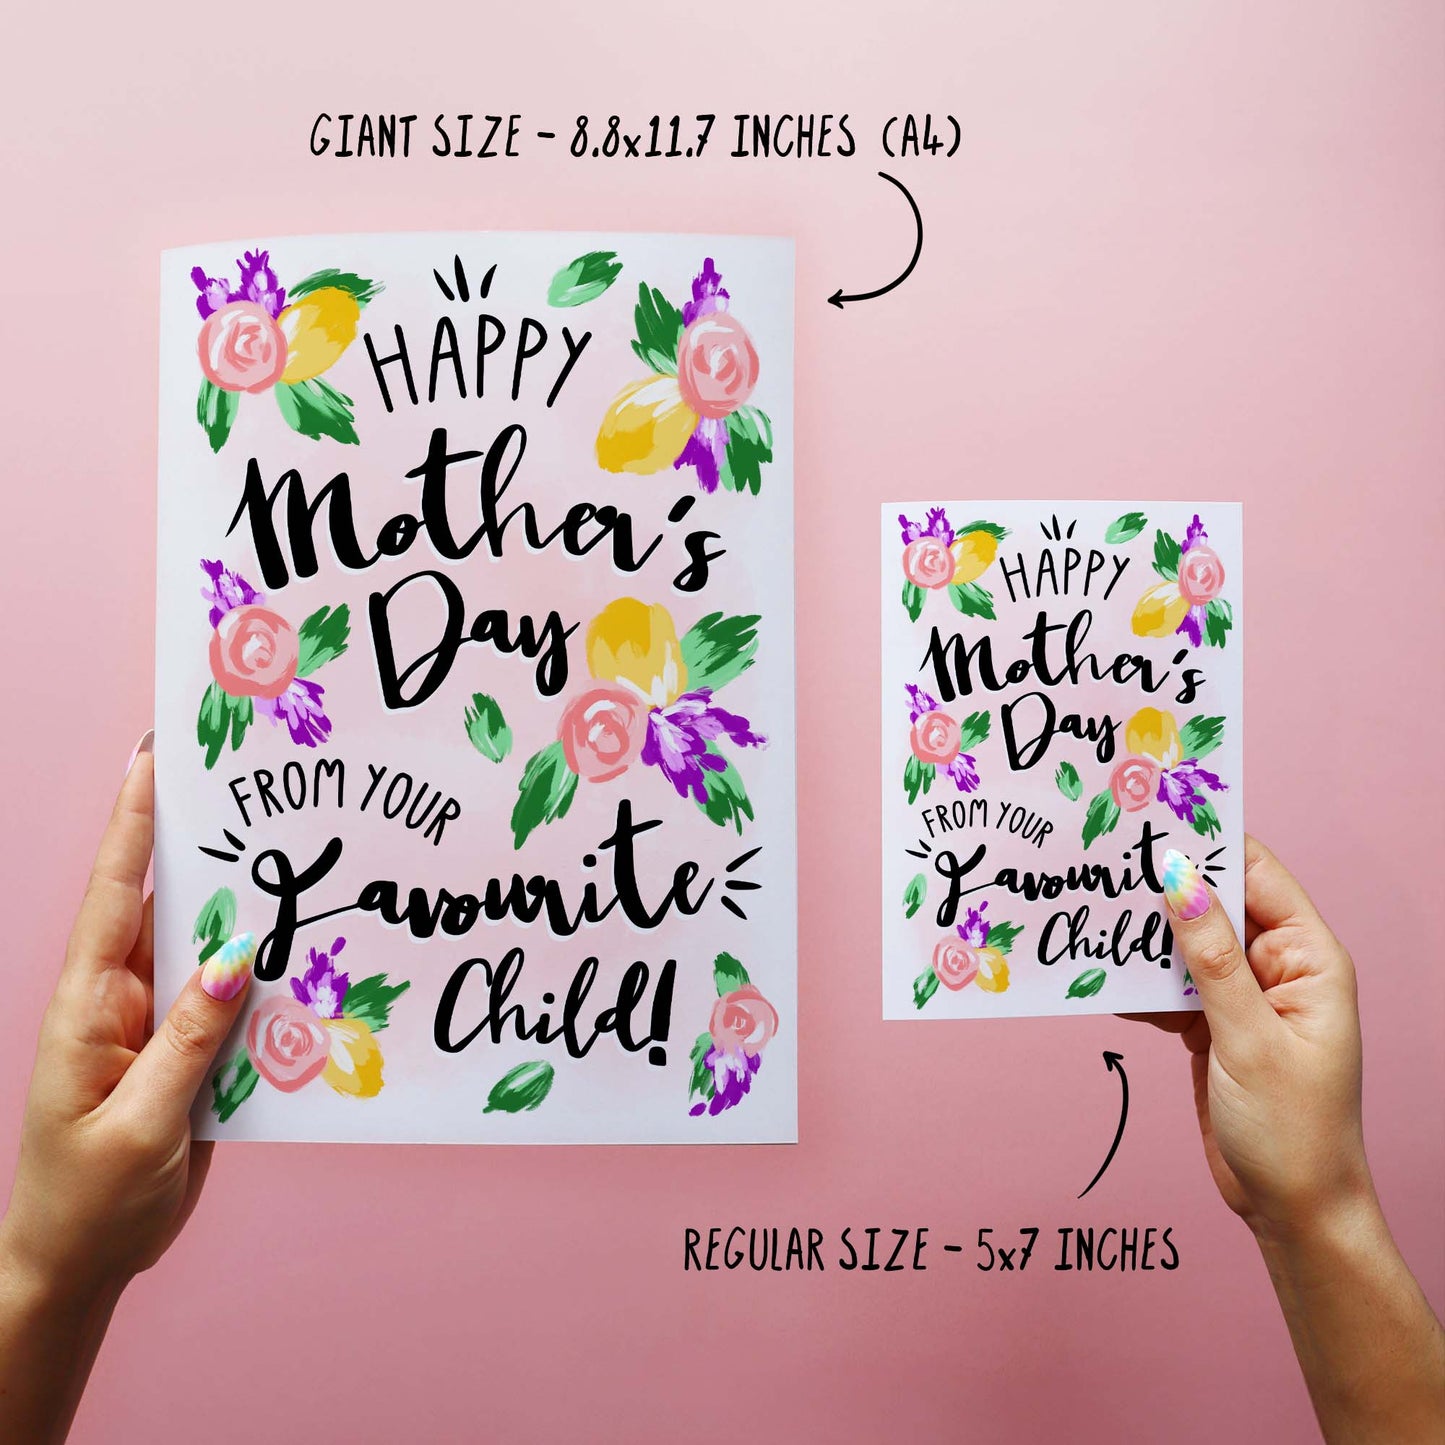 Favourite Child - Funny Mother's Day Card